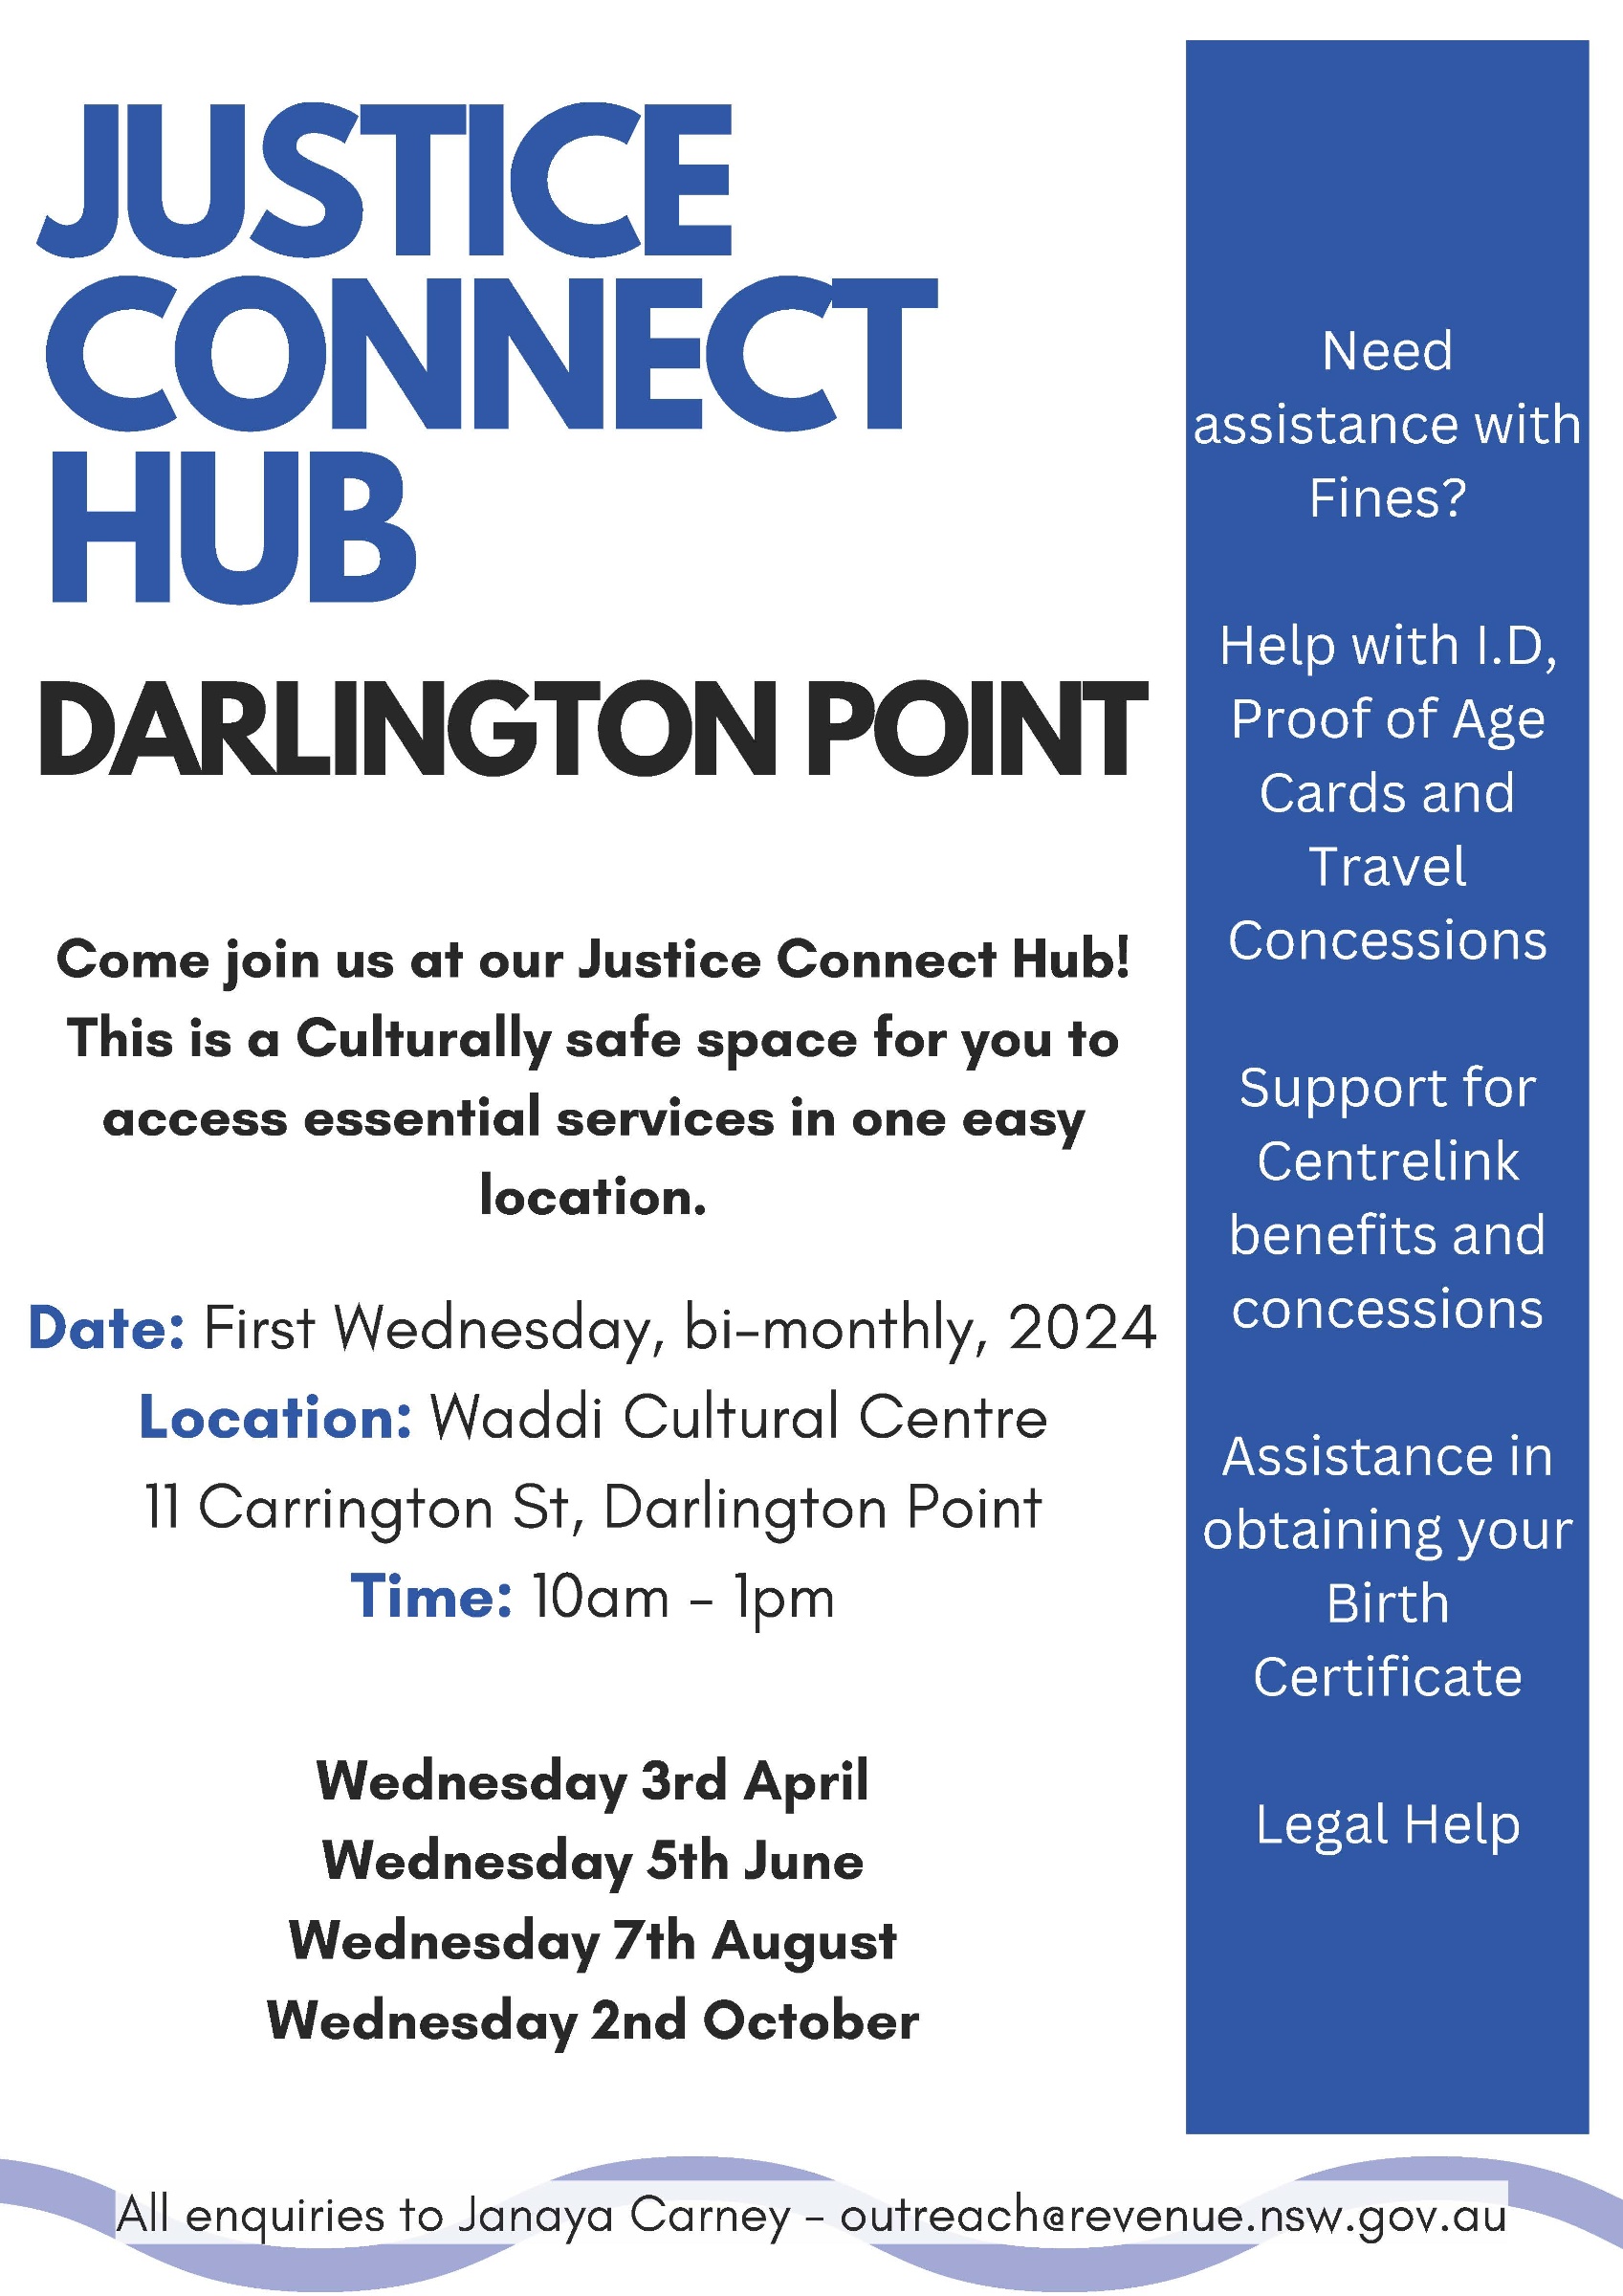 Darlington Point - Justice Connect Hub